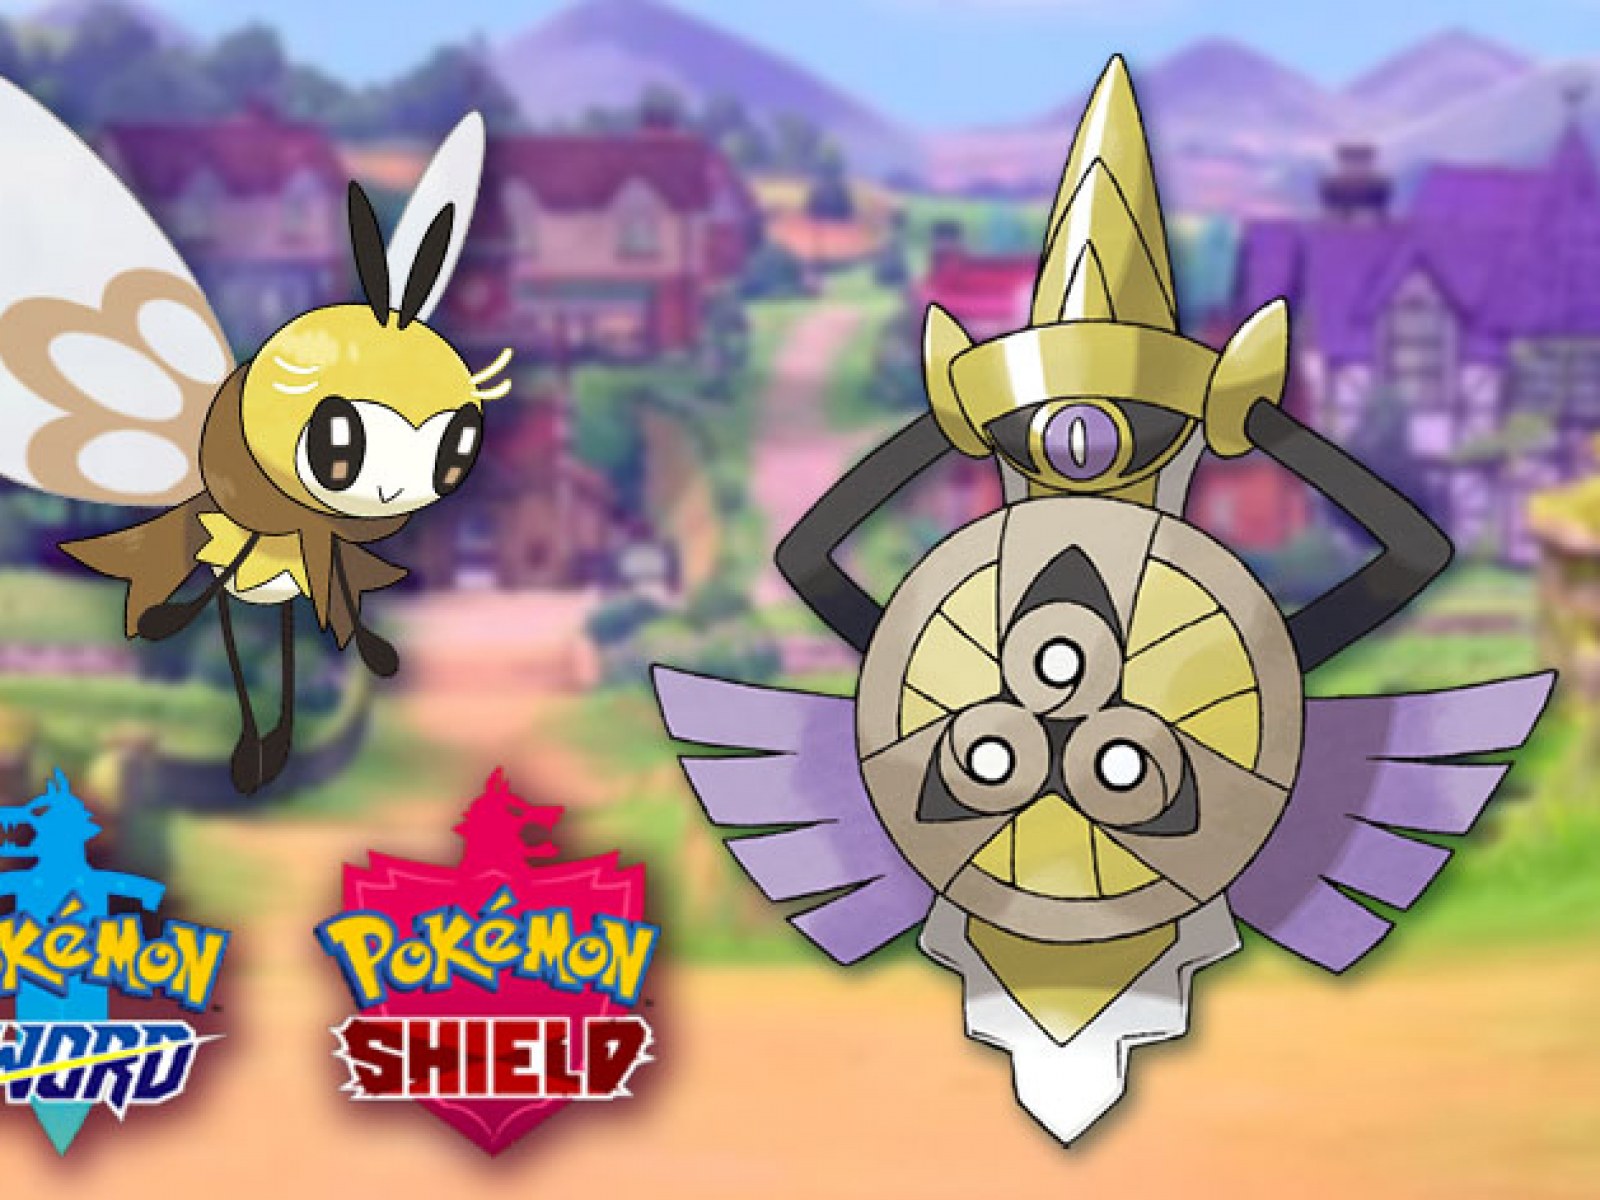 More Pokémon Confirmed To Return In Pokémon Sword And Shield